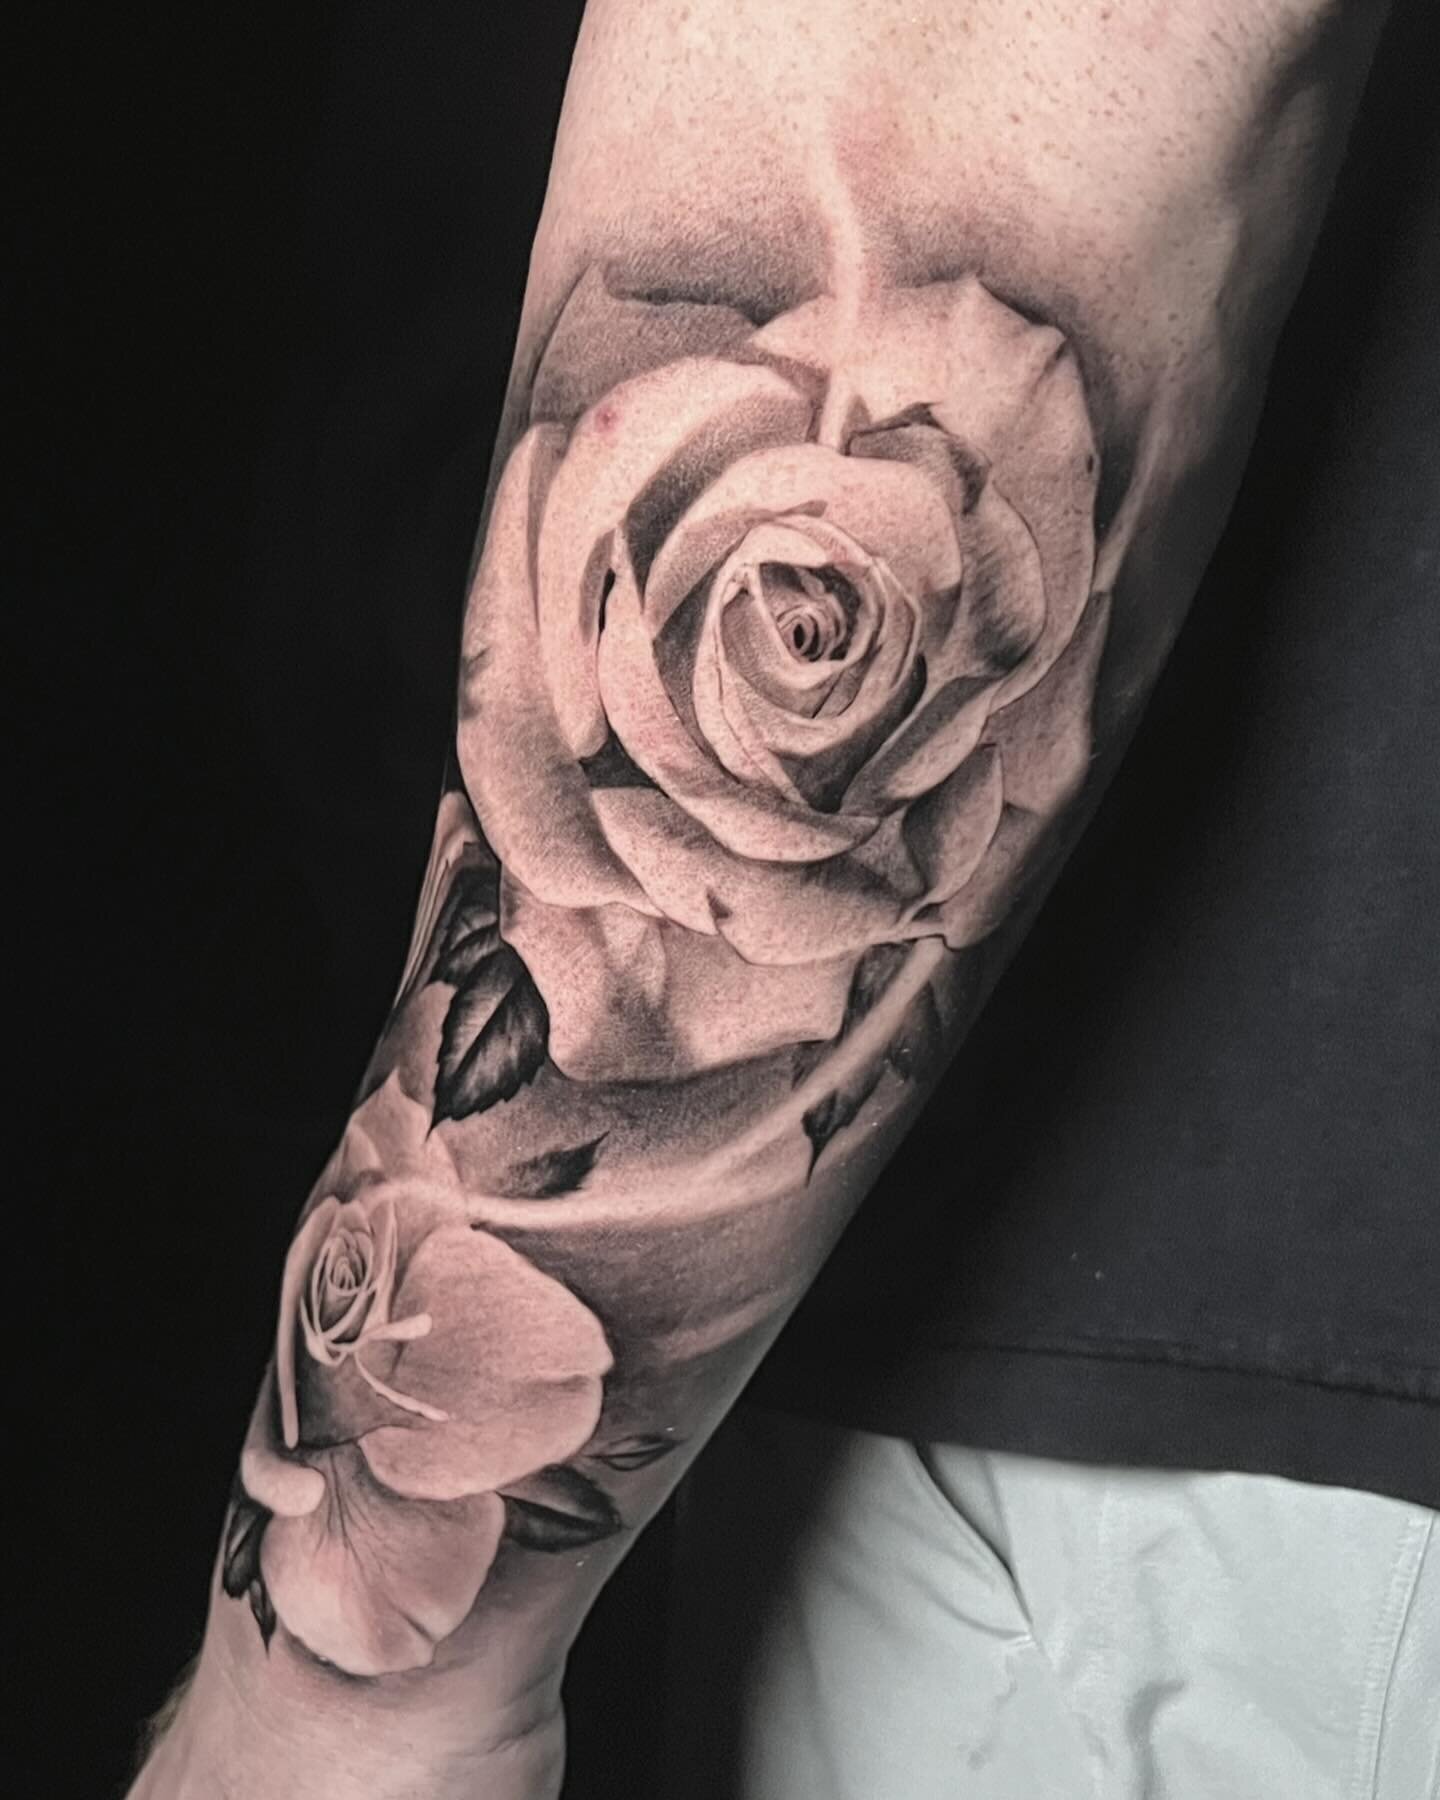 Work in progress floral sleeve! Can&rsquo;t wait to continue on! If interested in doing similar work please email booking@codeydoran.com or visit codeydoran.com

Done at @thelarivertattooco with @emalla.official 
#rosetattoo#codeydoran#tattoo

🌹